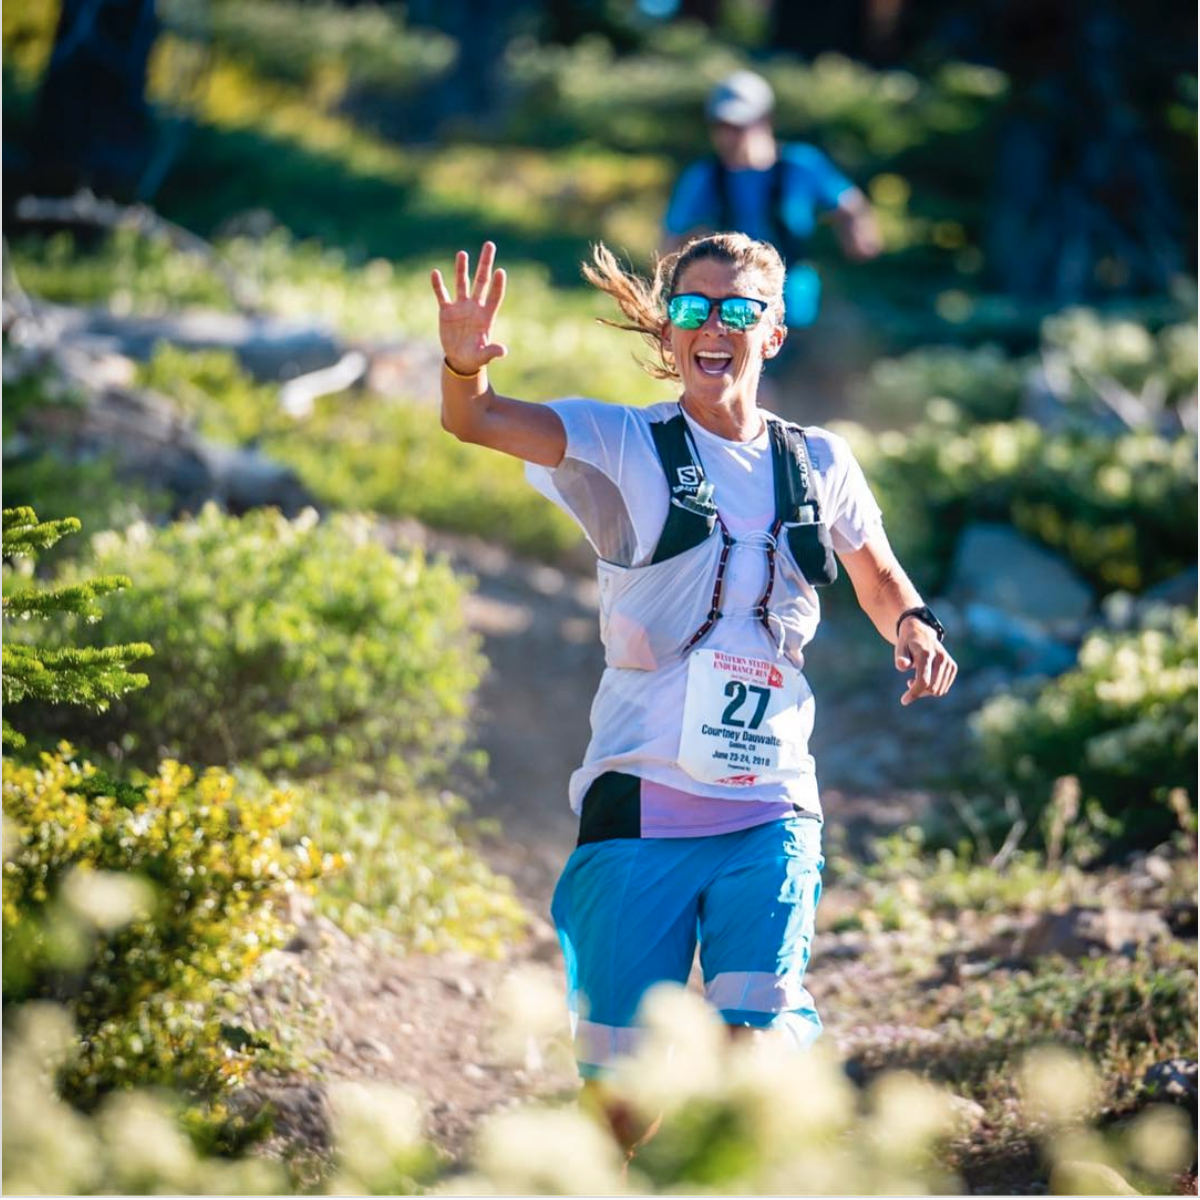 Courtney smiles and waves as she runs down a lush trail near Lake Tahoe during the Western States 100 Endurance Run. She's wearing long blue shorts, a white t shirt, reflective sunglasses, and a hydration pack.